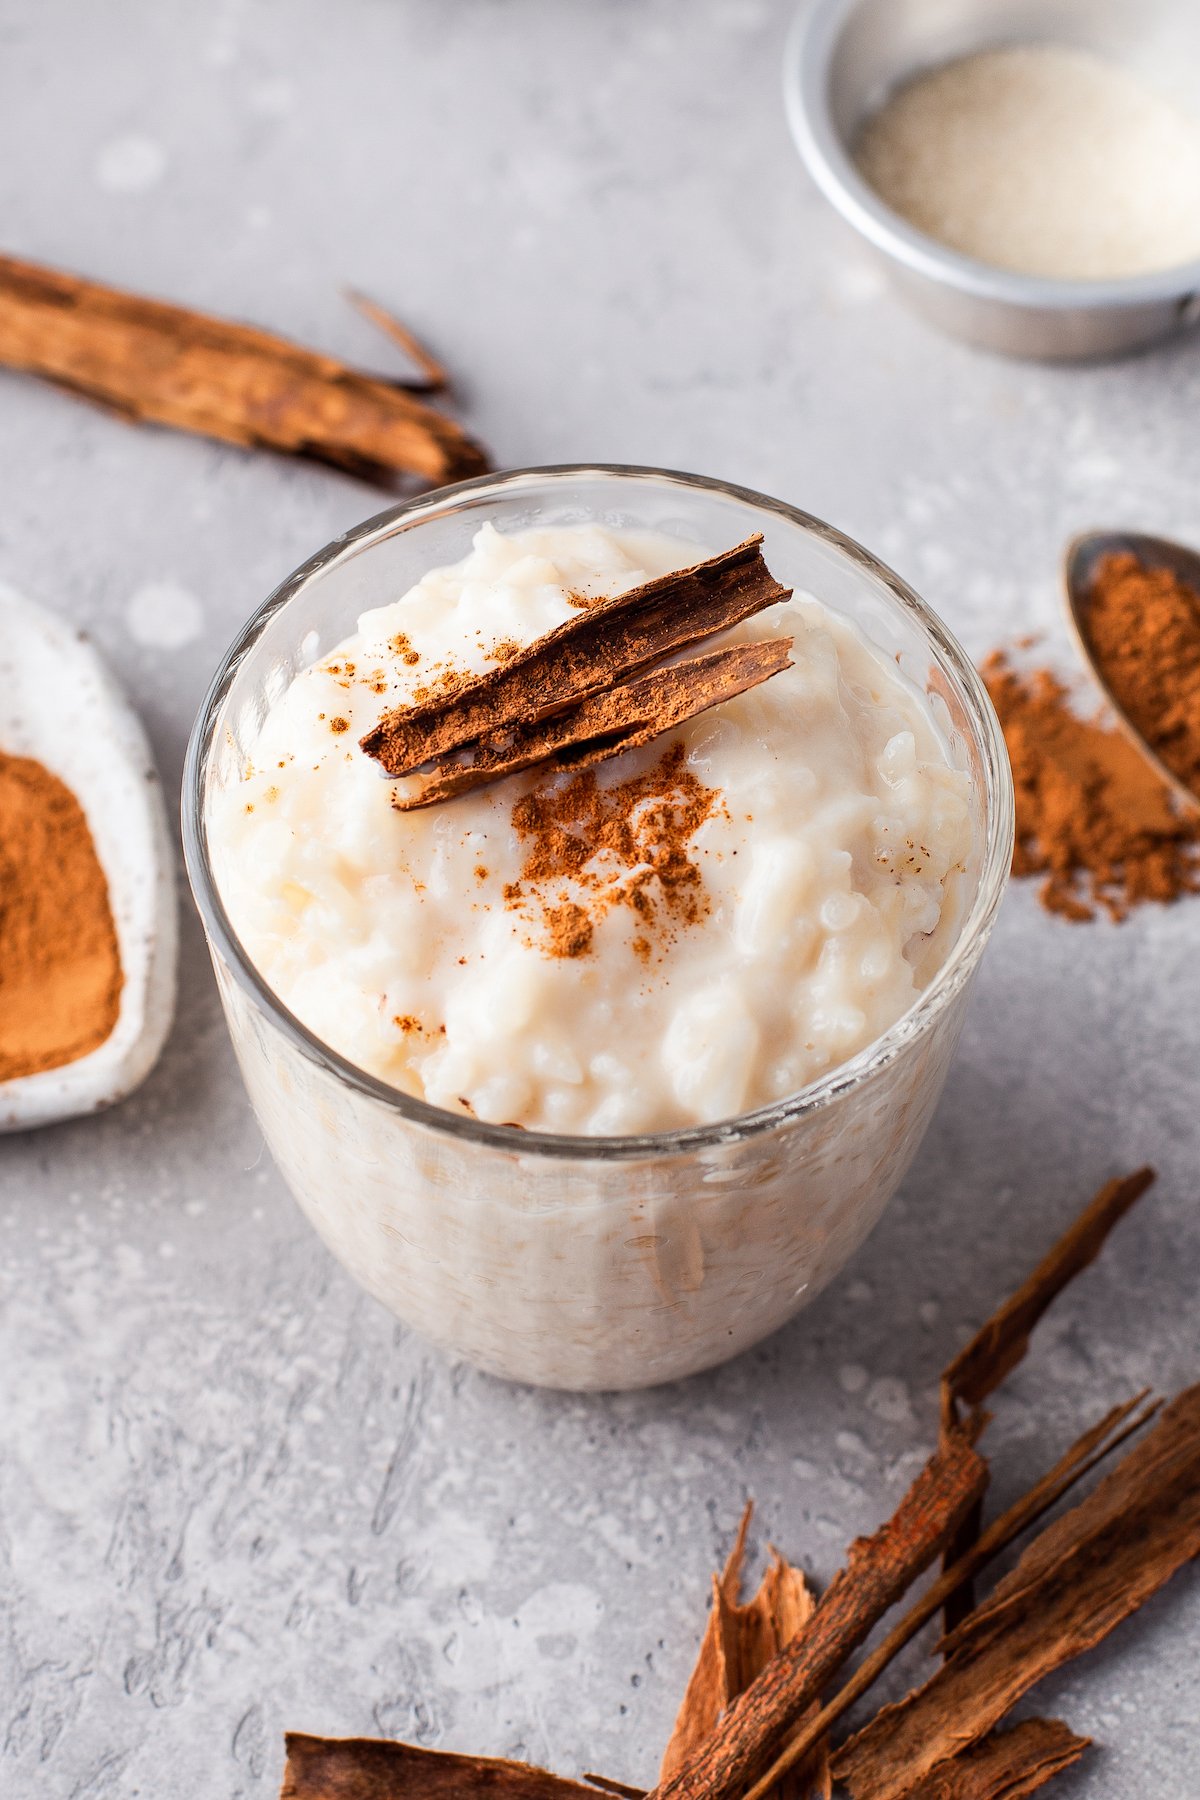 A serving of chilled arroz con leche (Spanish rice pudding) with a toasted cinnamon stick garnish on top.